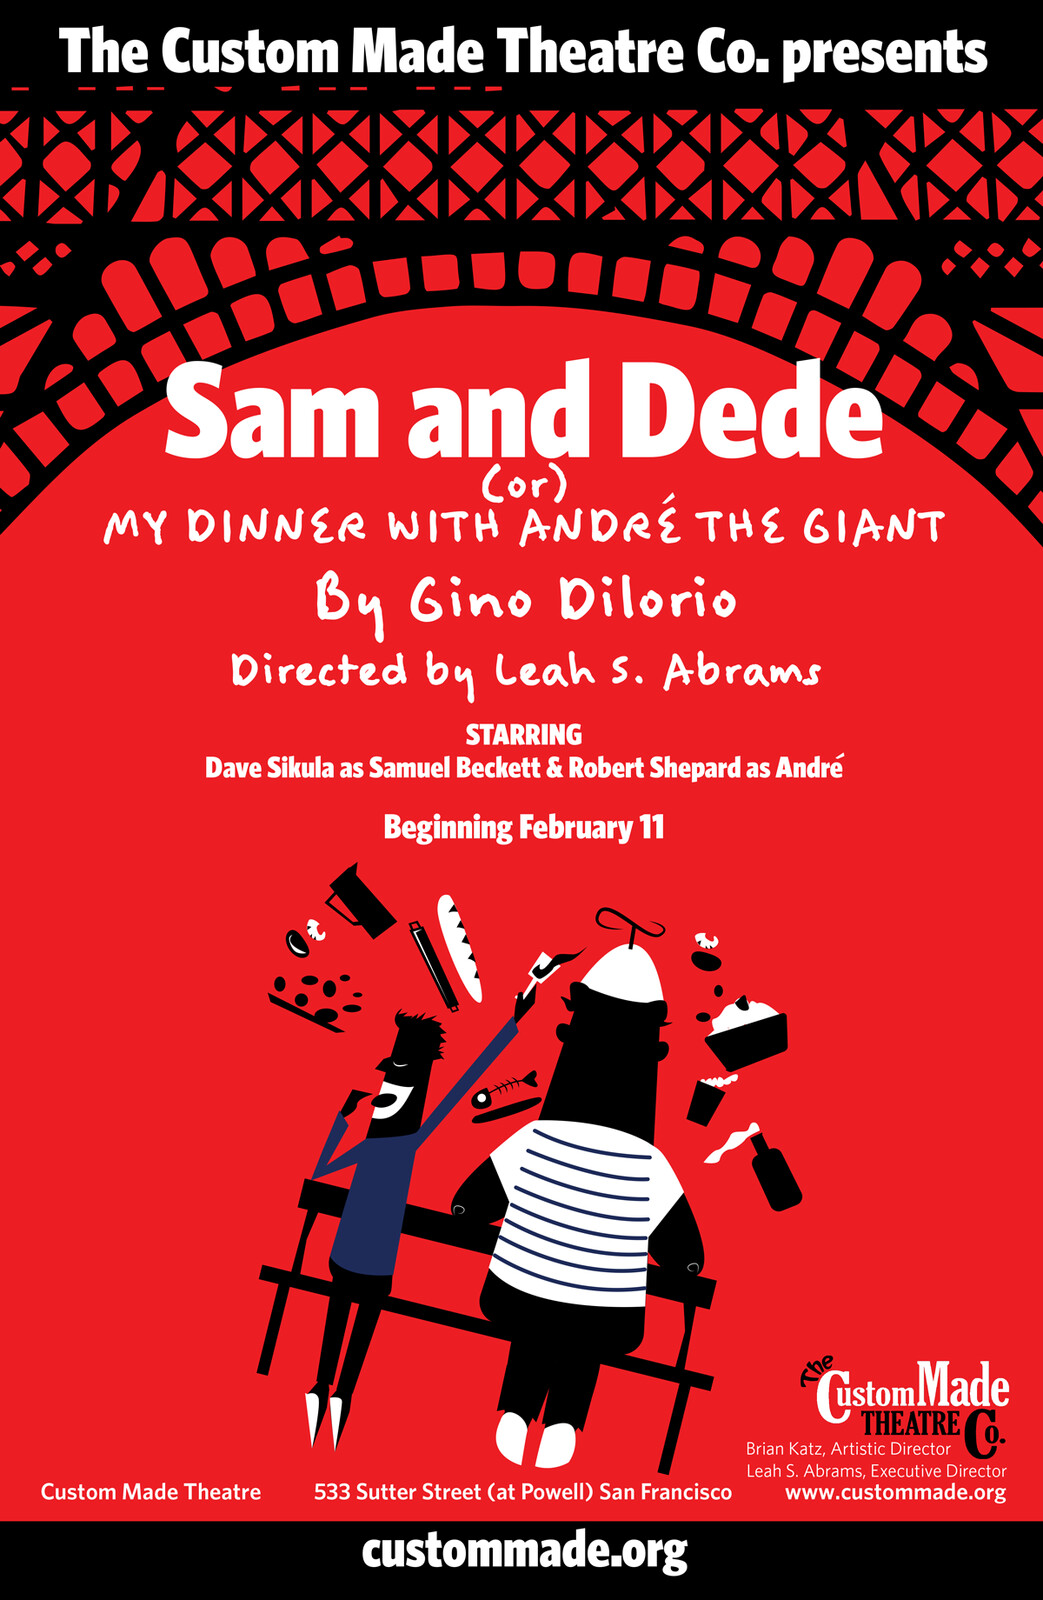 Sam and Dede, (or) my dinner with andre the giant